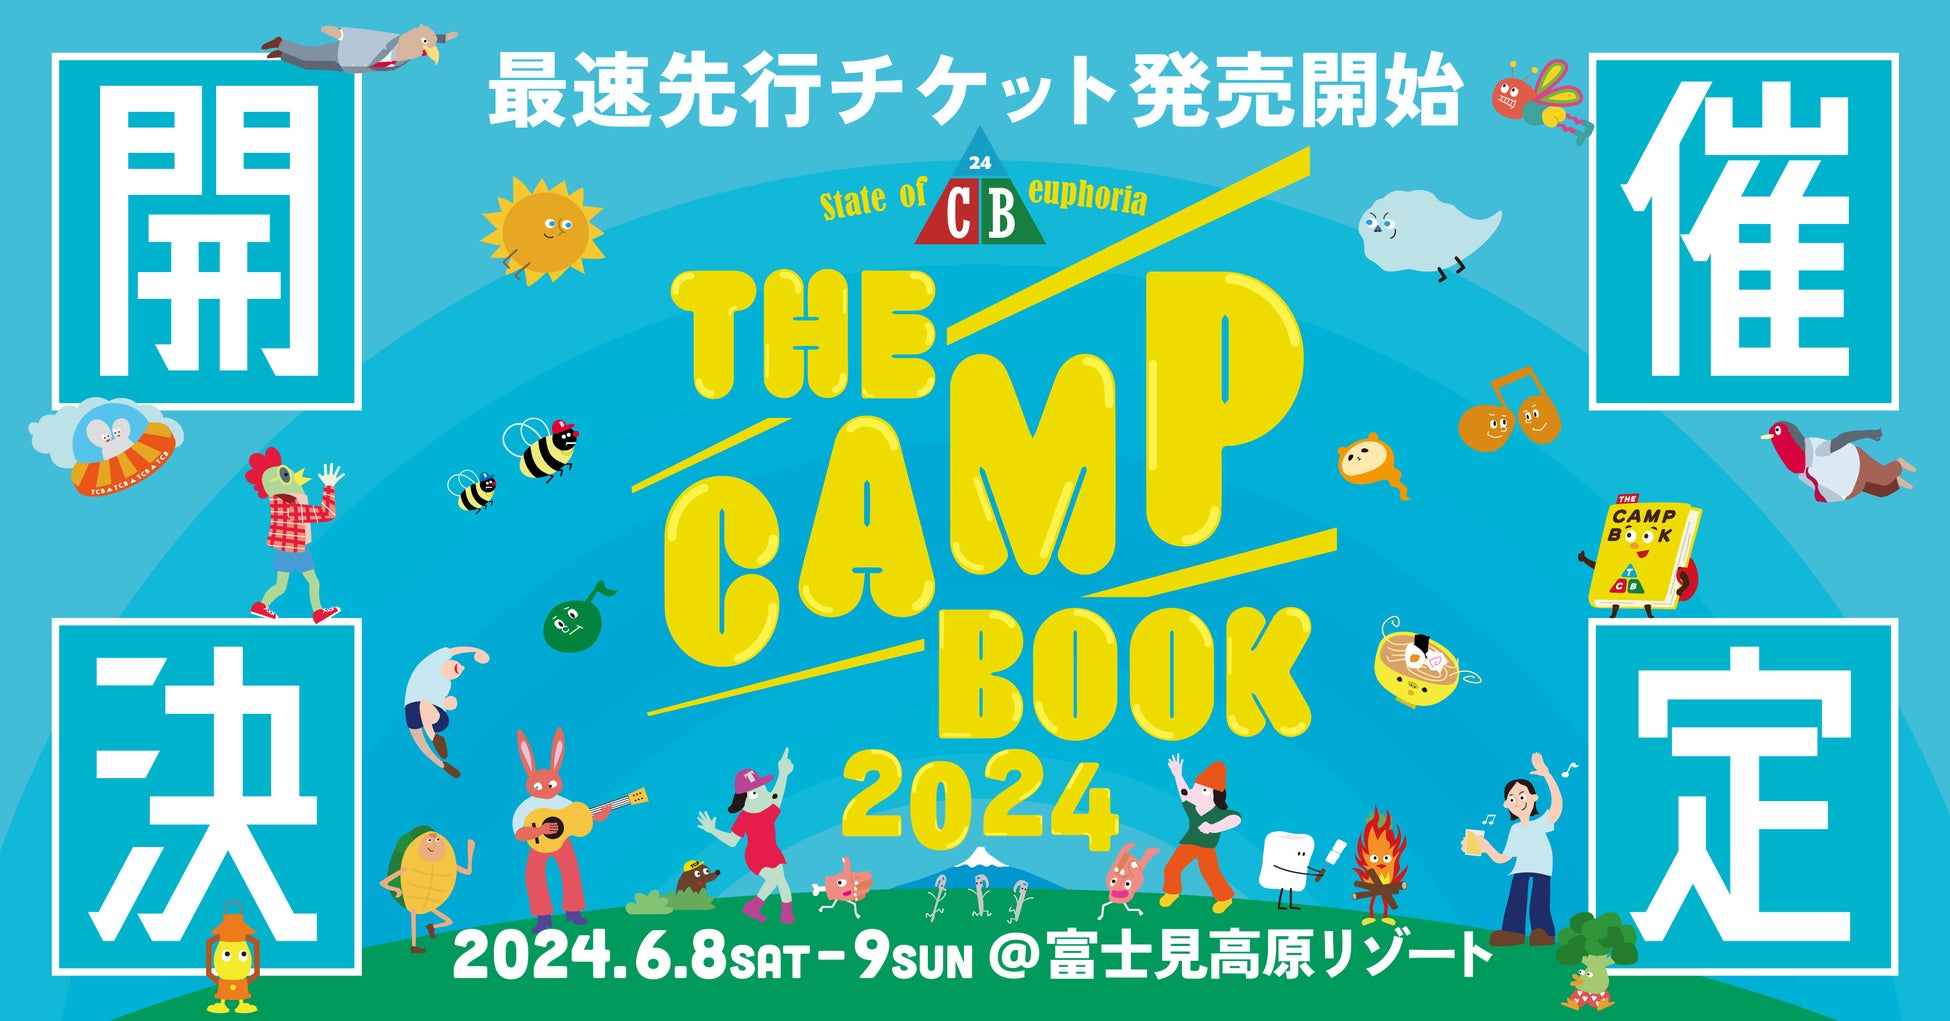 「THE CAMP BOOK 2024」開催決定！2024年6月8日(土) ・ 9日(日)＠富士見高原リゾート